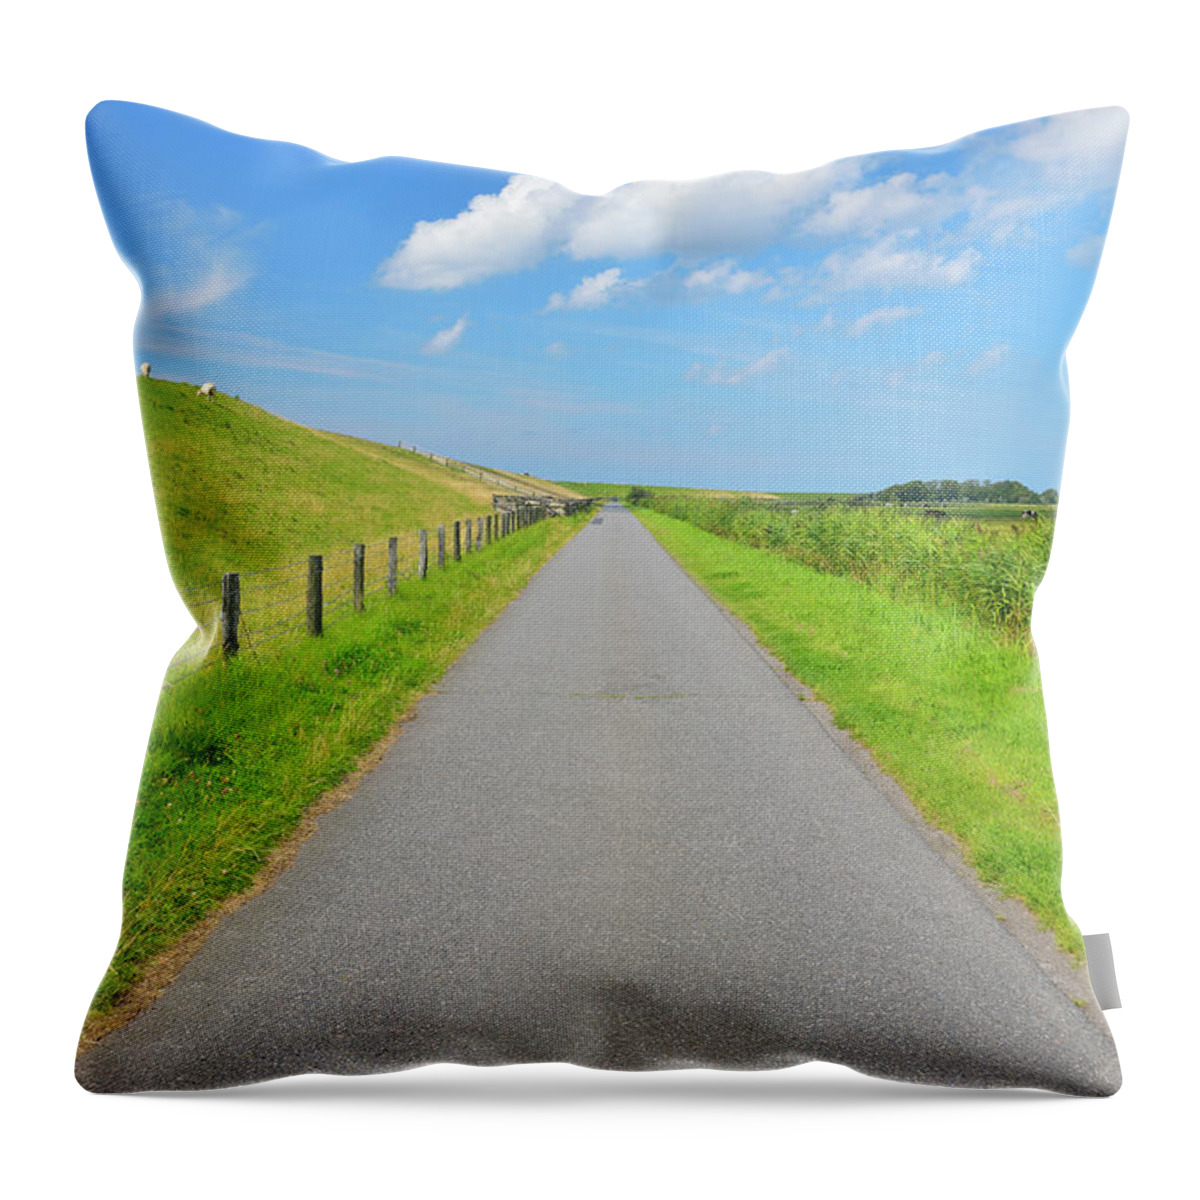 Grass Throw Pillow featuring the photograph Road Behind The Dike by Raimund Linke